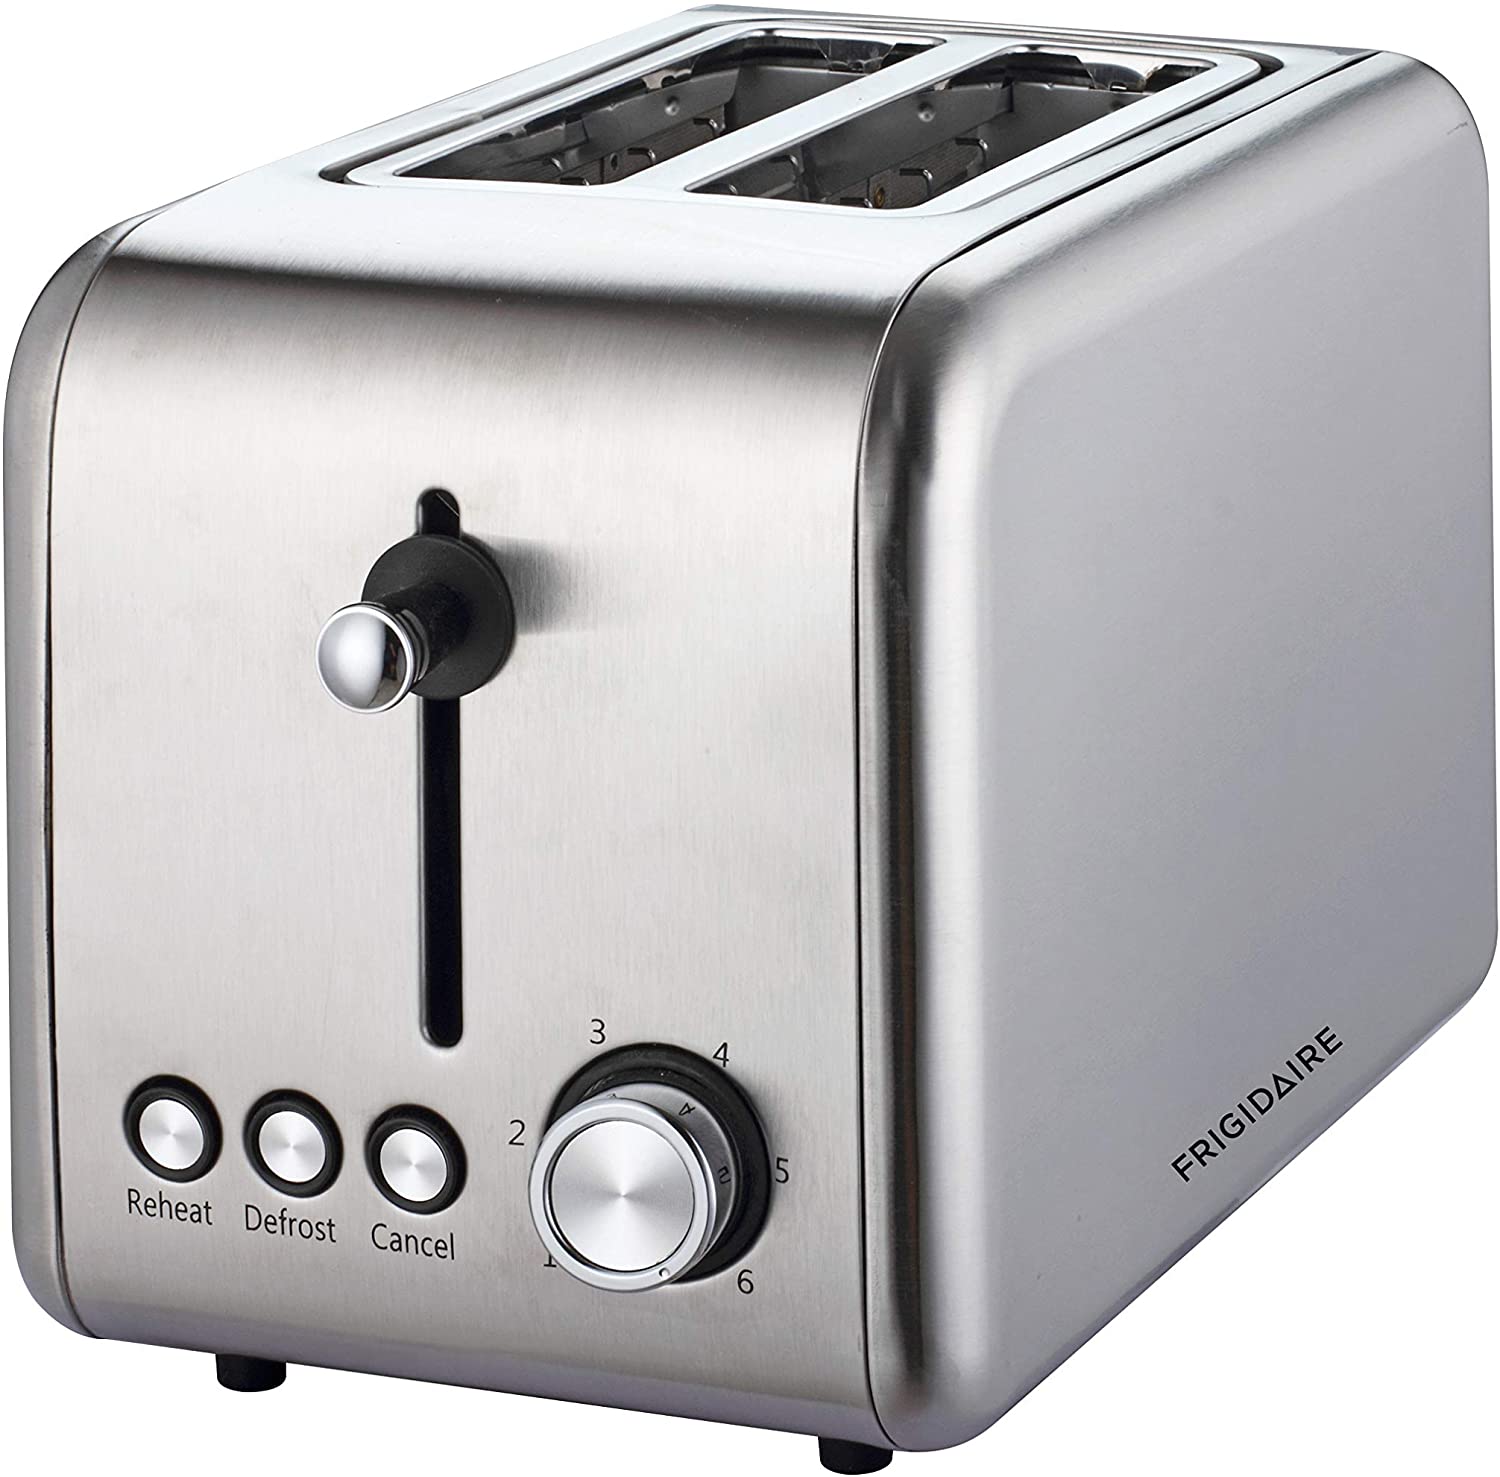 With an elegant combination of brushed and polished metal body, this toaster will look great in any kitchen. The Scene 2 slot long toaster FD3112 from Frigidaire can toast up to 4 slices of bread or baguette style bread and features an adjustable browning 